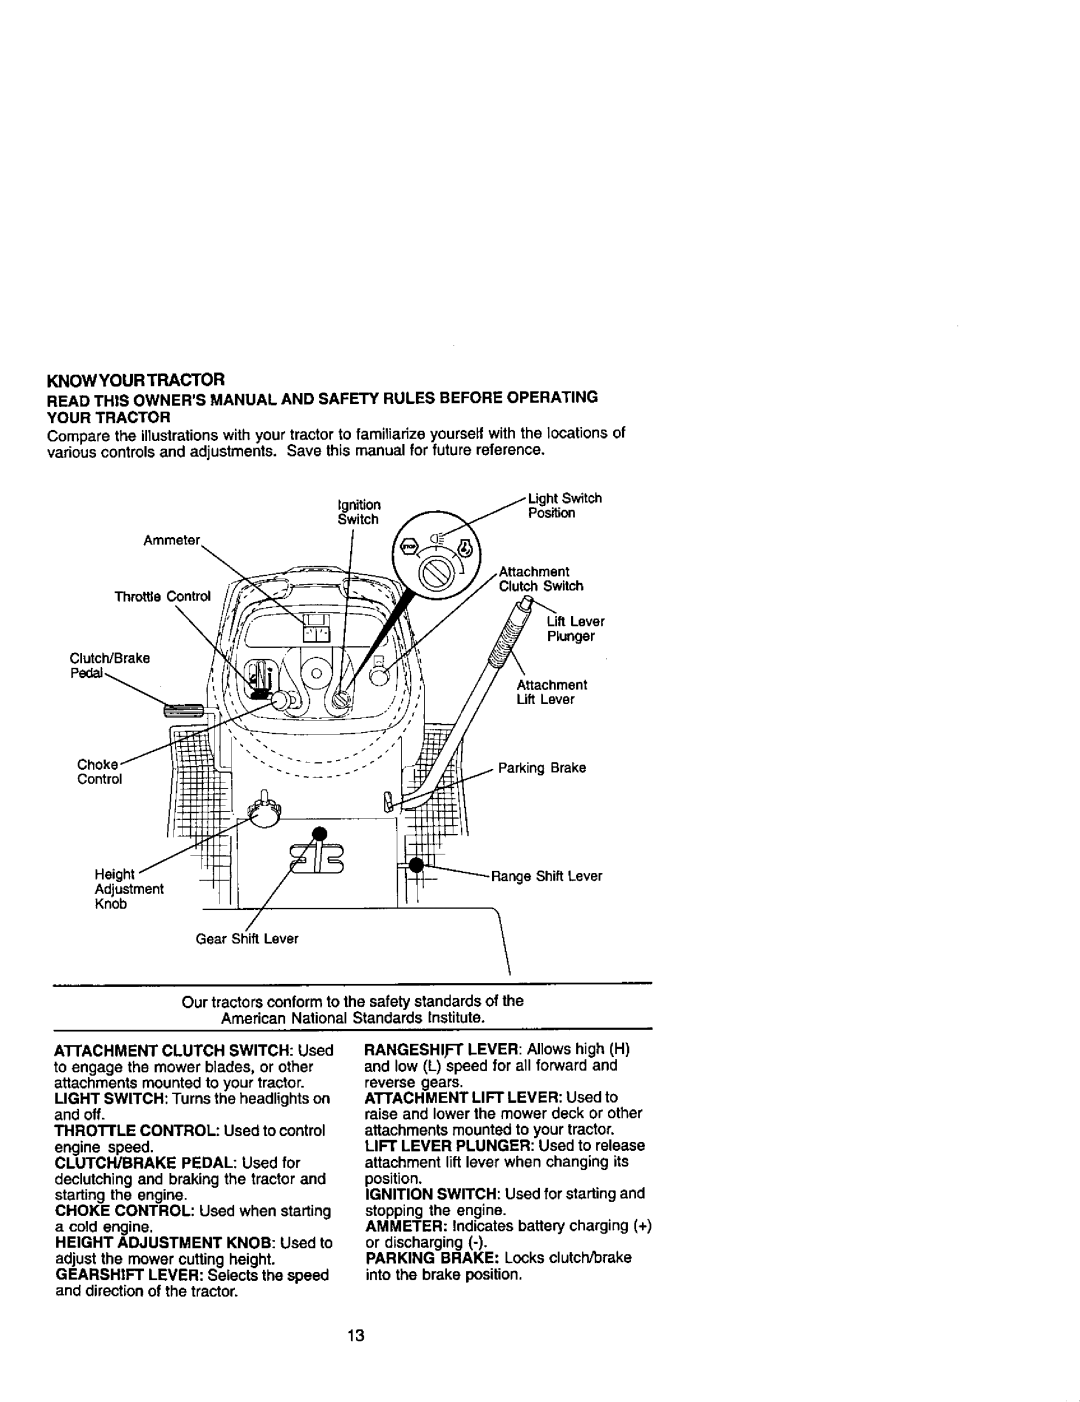 Craftsman 917.27499 manual engine speed, Knowyour Tractor 